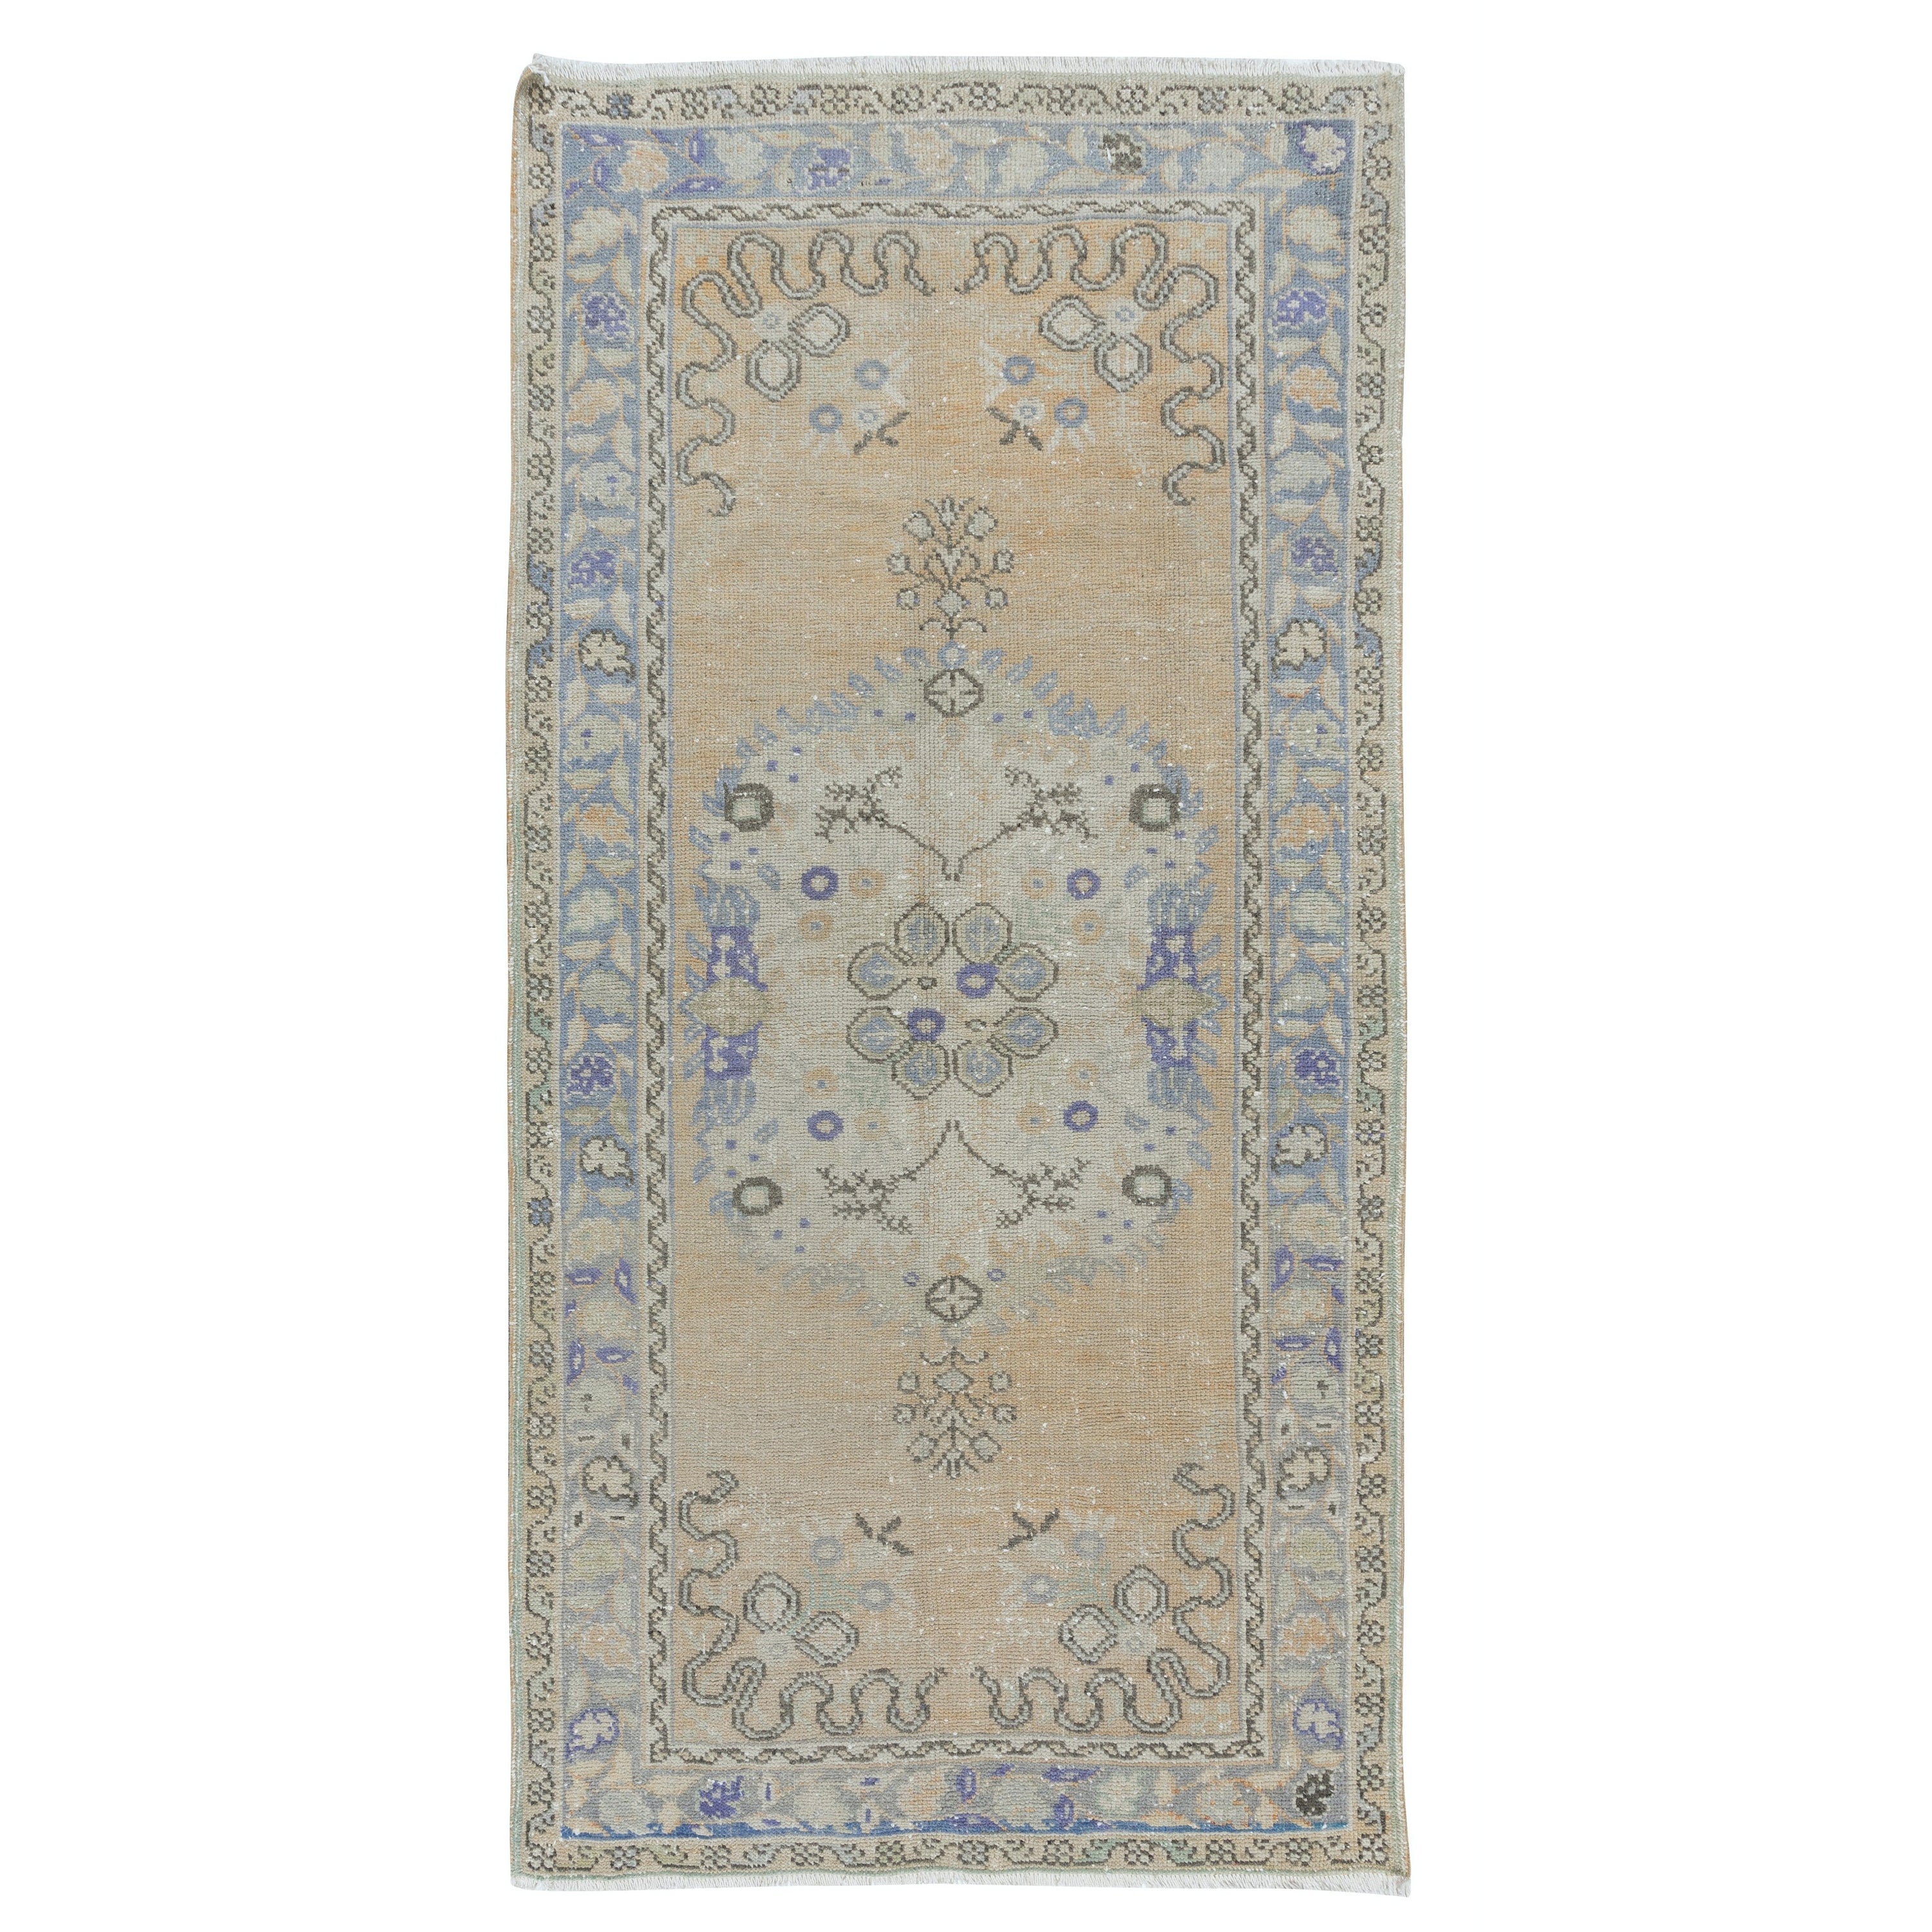 3.2x6.5 Ft Hand Knotted Turkish Rug with Soft Colors, Mid-20th Century Carpet For Sale